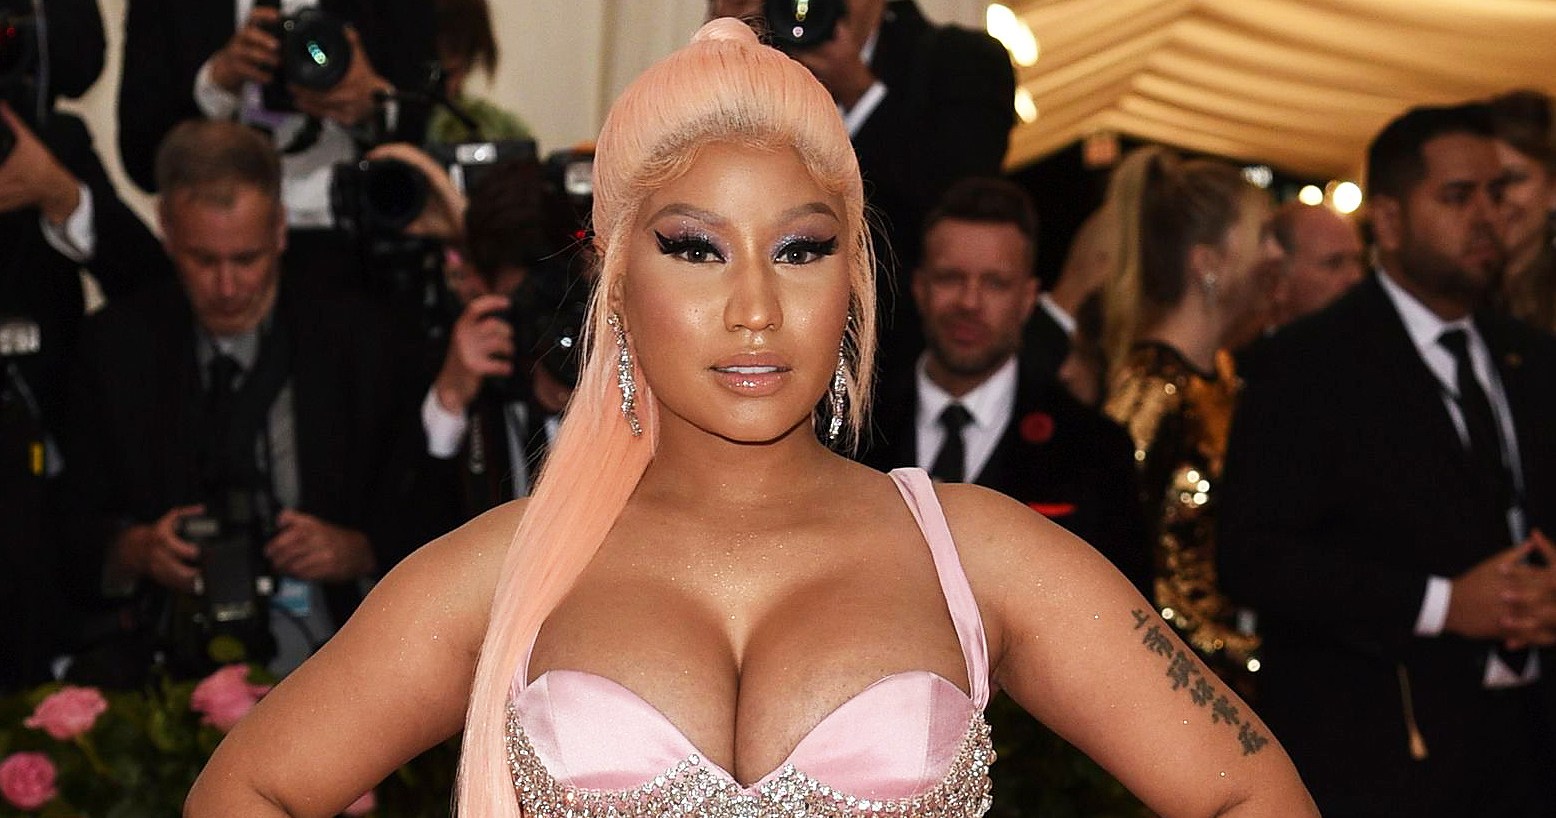 ariana murillo recommends nicki minaj playing with her boobs pic